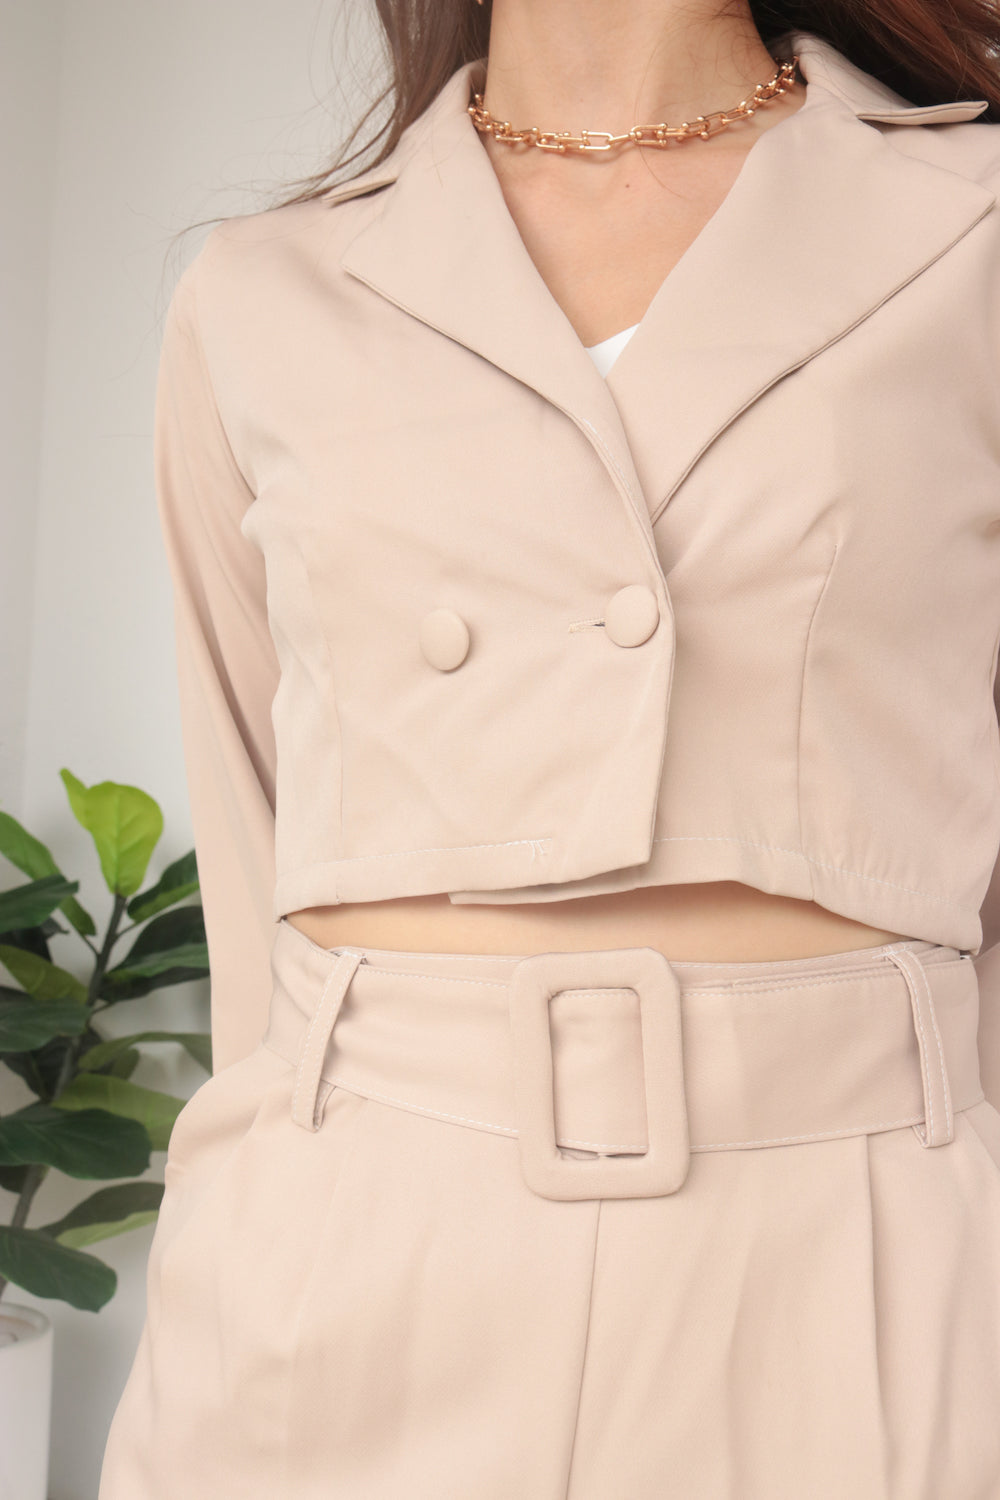 * PREMIUM * - Edelia Belted Highwaisted Shorts in Nude Khaki - Self Manufactured by LBRLABEL